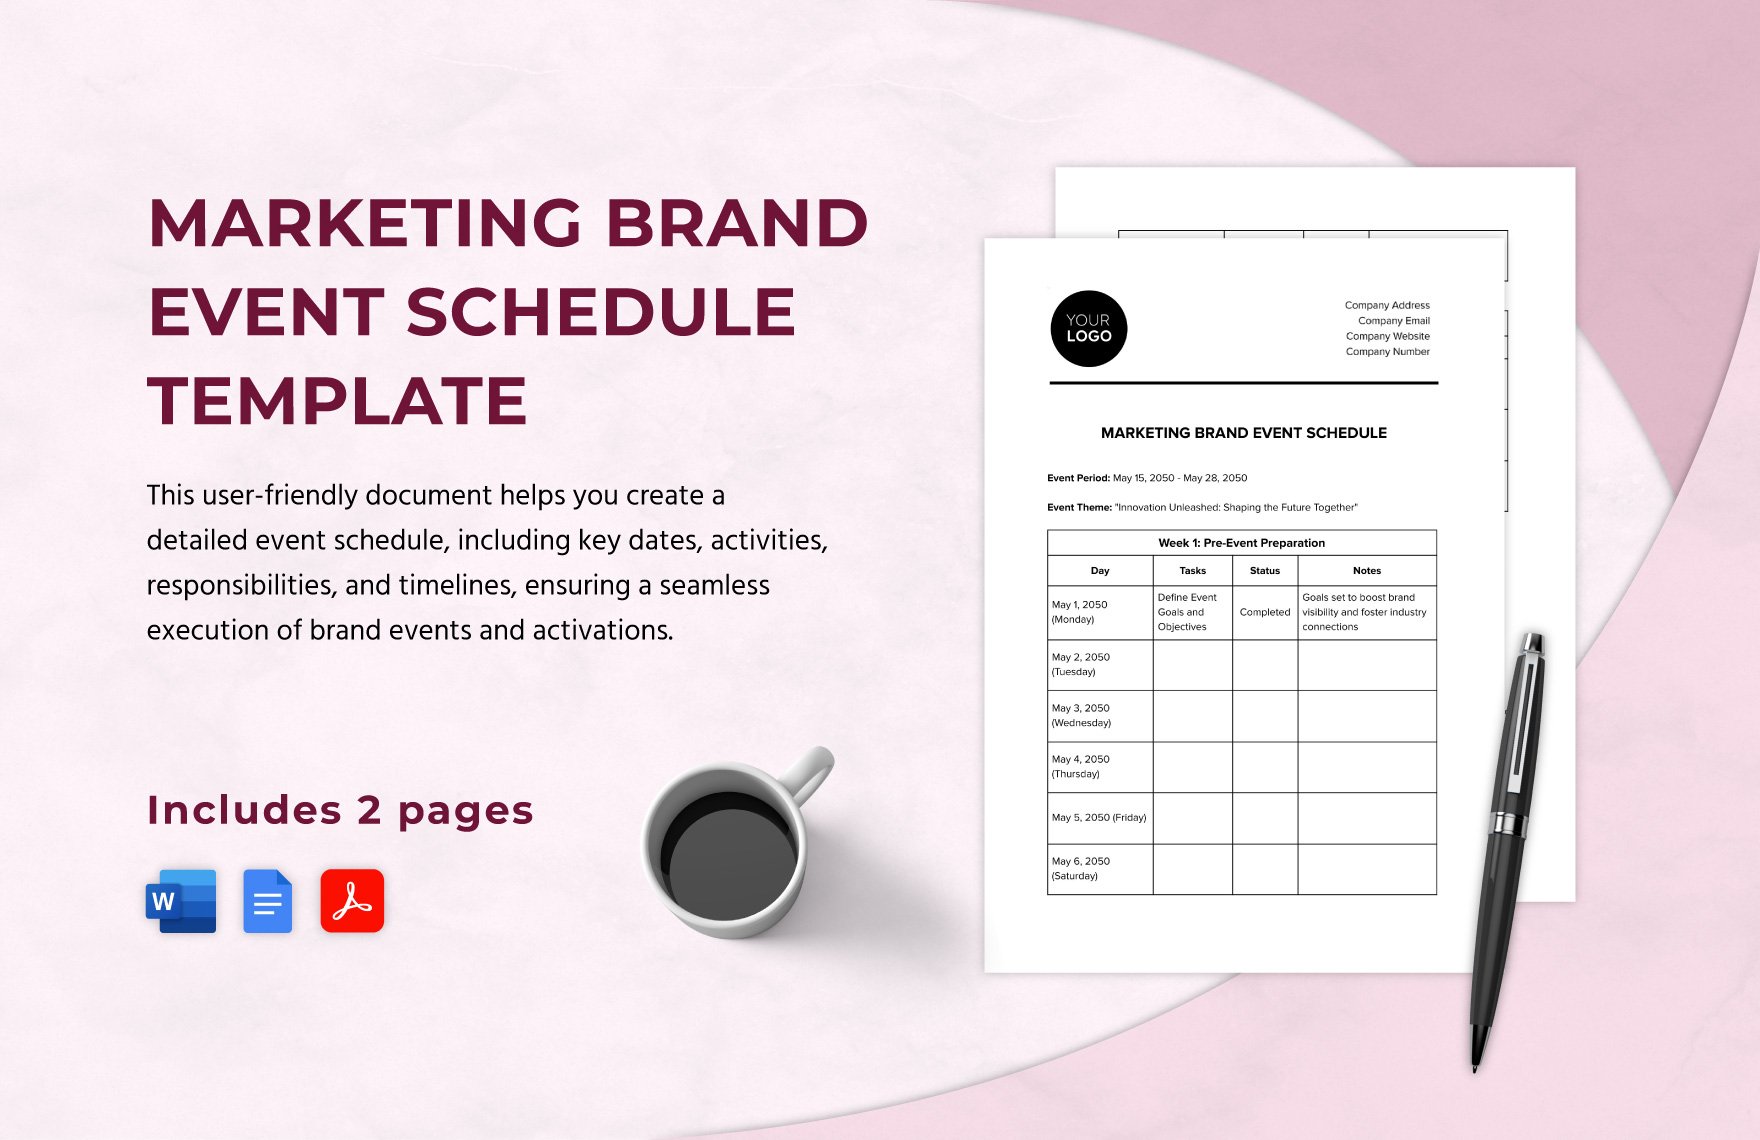 Marketing Brand Event Schedule Template in Word, Google Docs, PDF